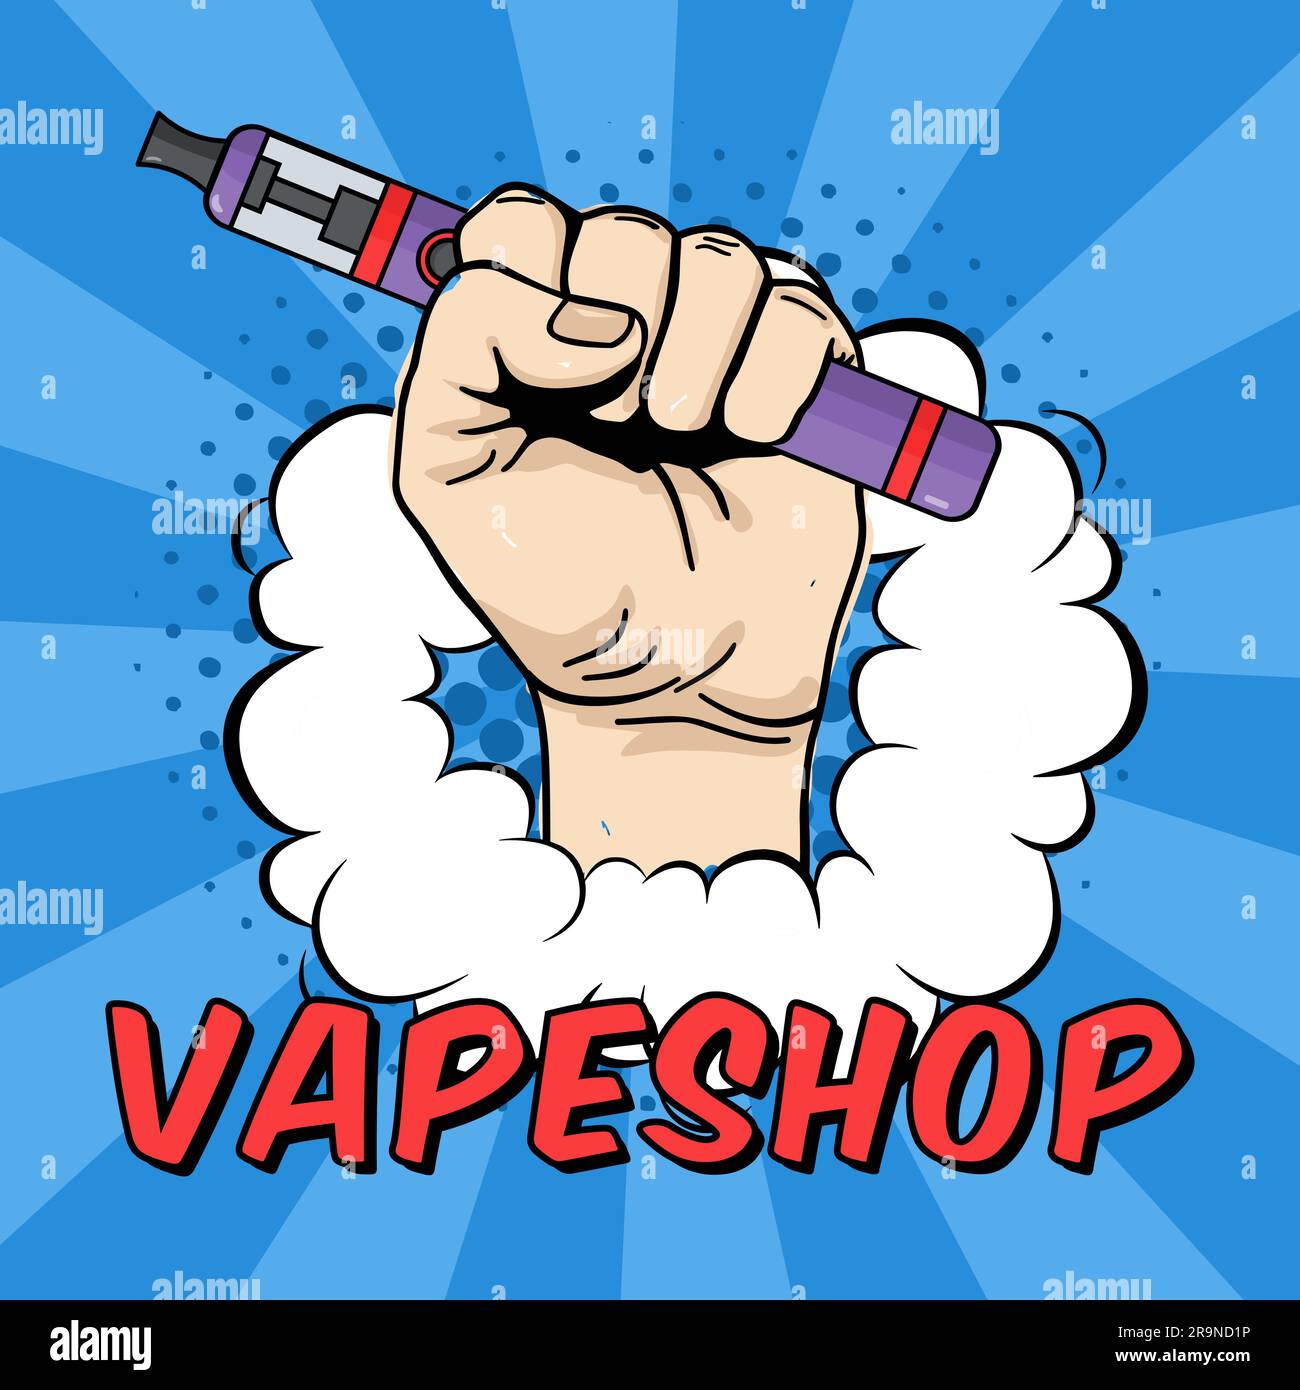 Vector vape shop illustration with hand holding electric tool for vaping. Vapor, electric cigarette, vaporizer e-cig icon. Comics cartoon style. Stock Vector